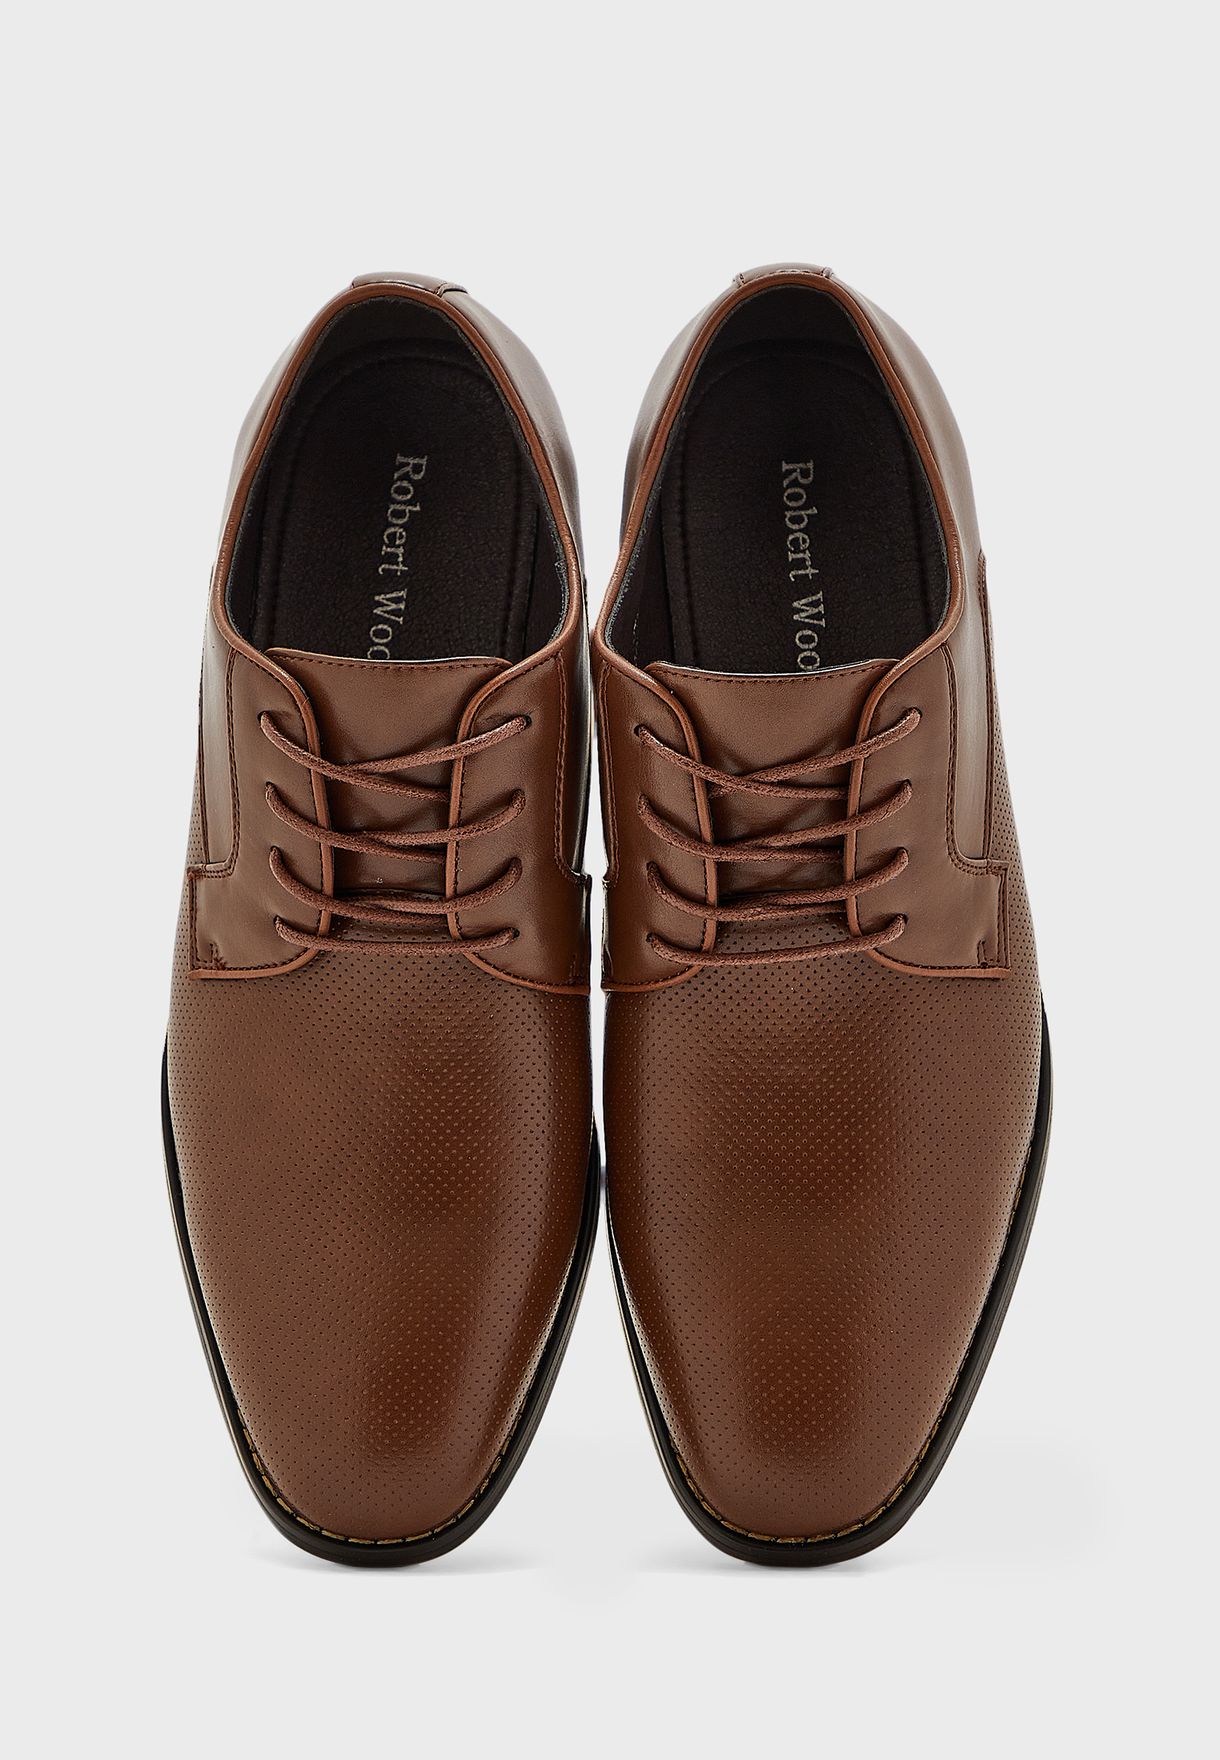 Classic Burnished Formal Lace Up